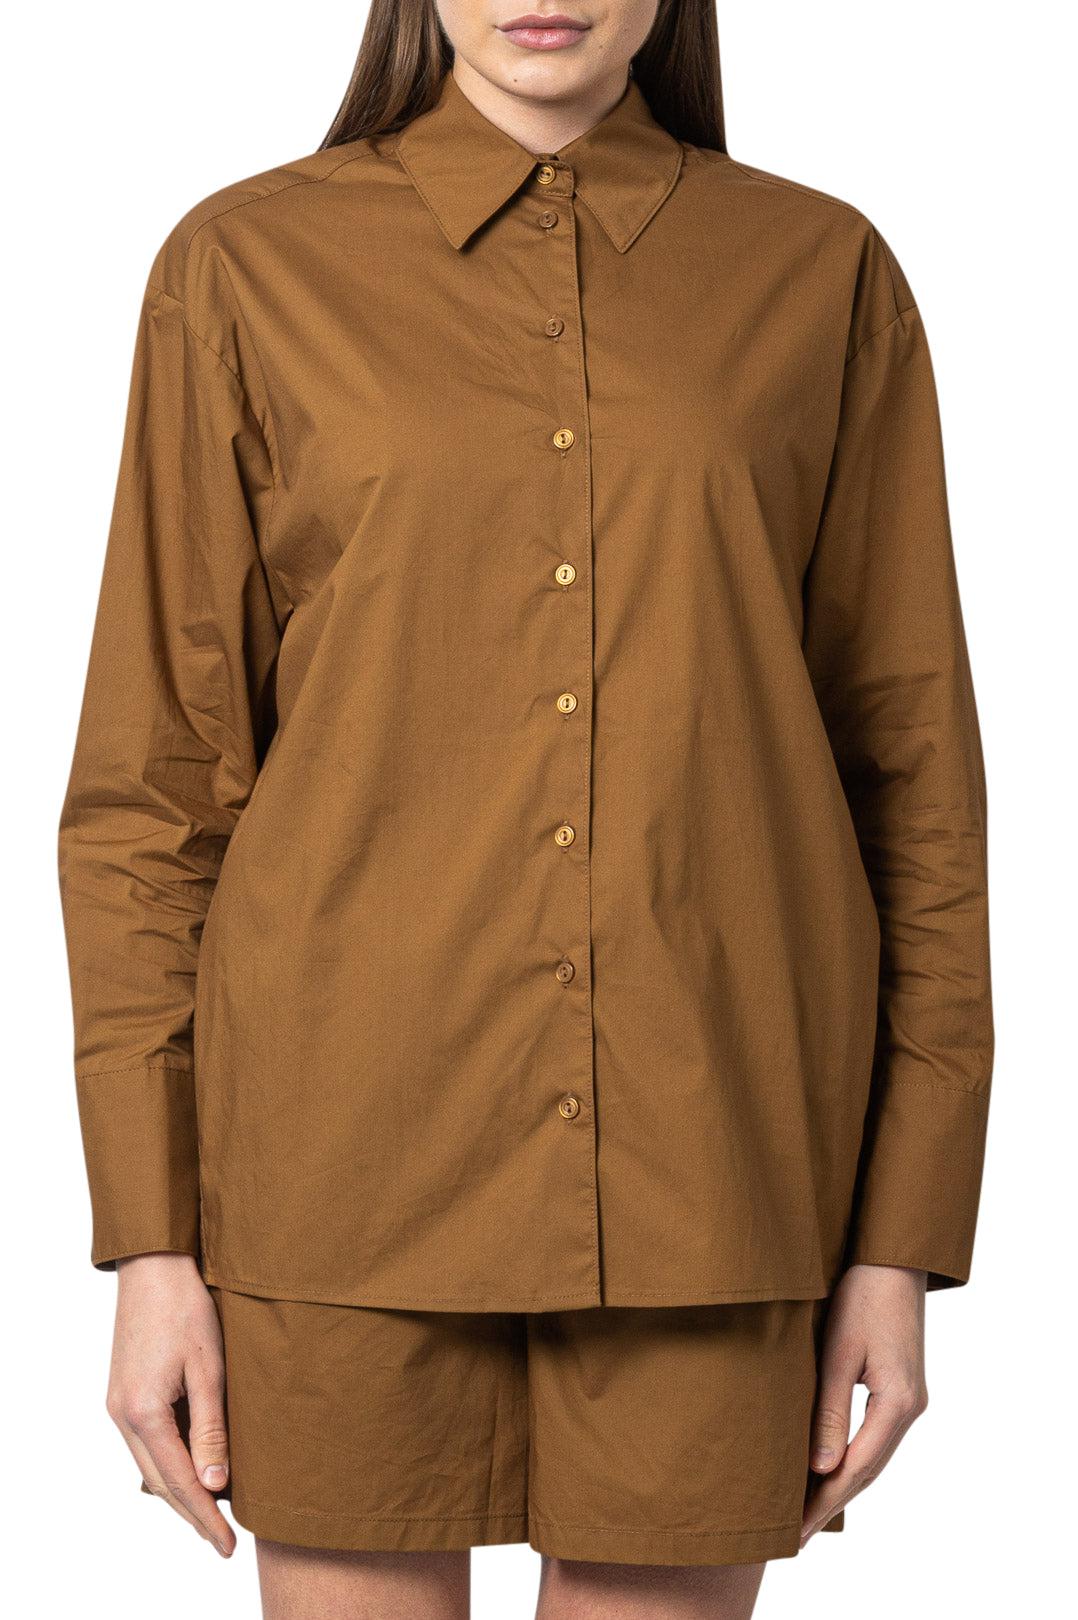 Herskind-Over-fit cotton shirt-dgallerystore